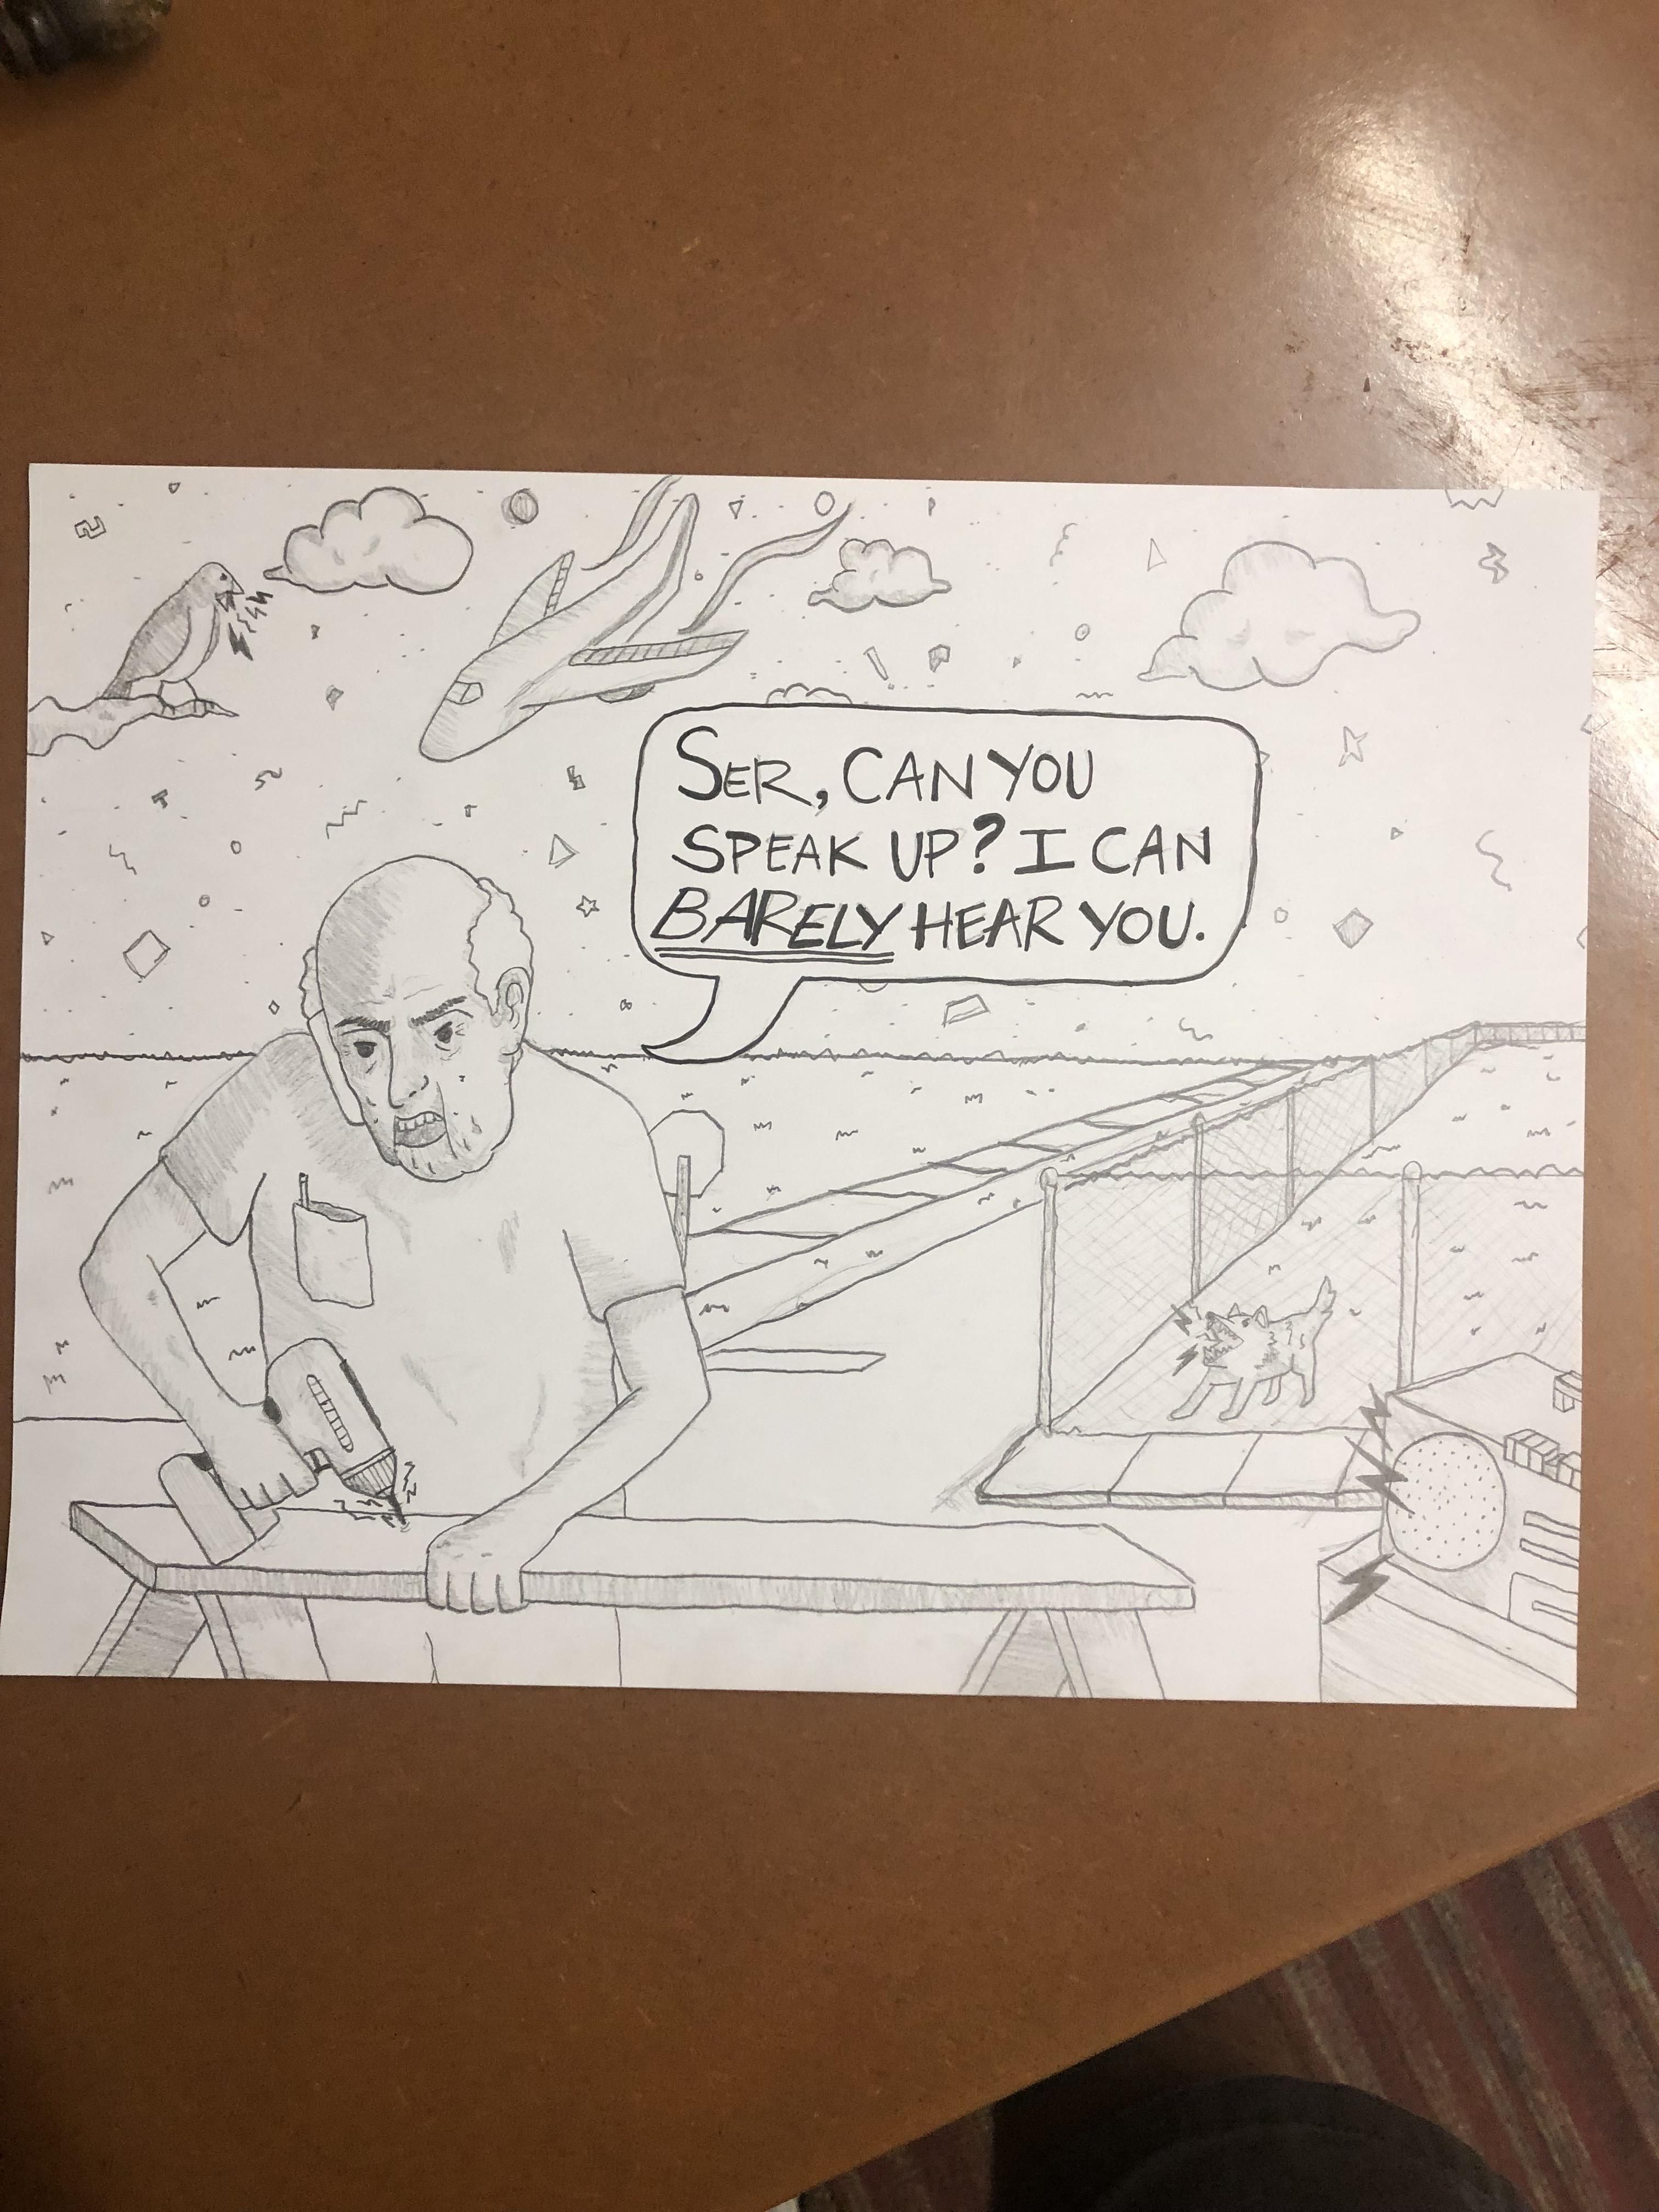 I work in a call center. I like to draw my callers sometimes. Here is a caller that can’t quite hear me for some reason: